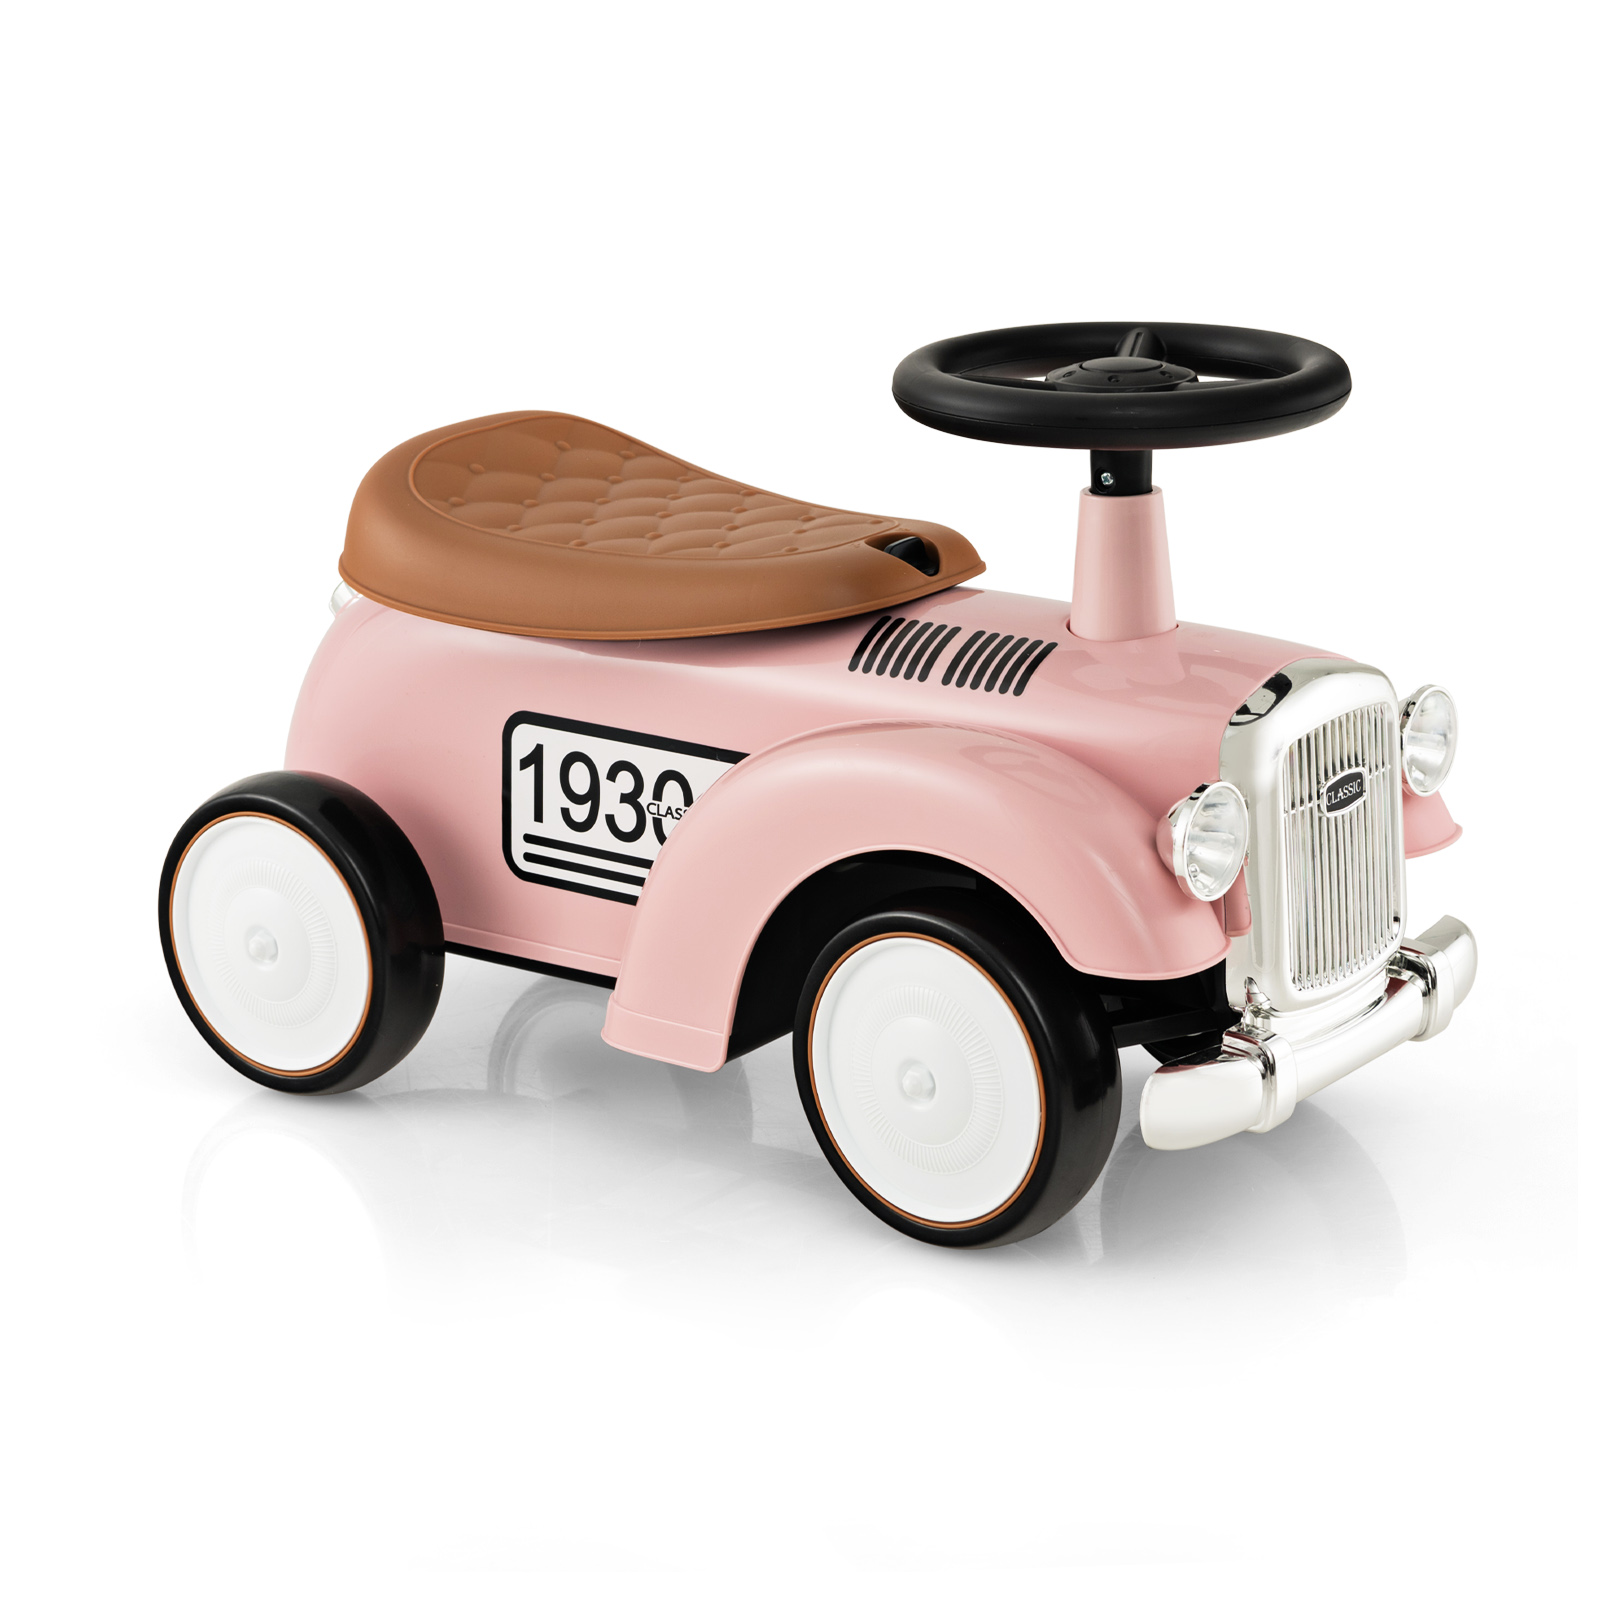 Kids Ride On Car with Under-seat Storage Space for 18-36 Months Boys and Girls Gifts-Pink